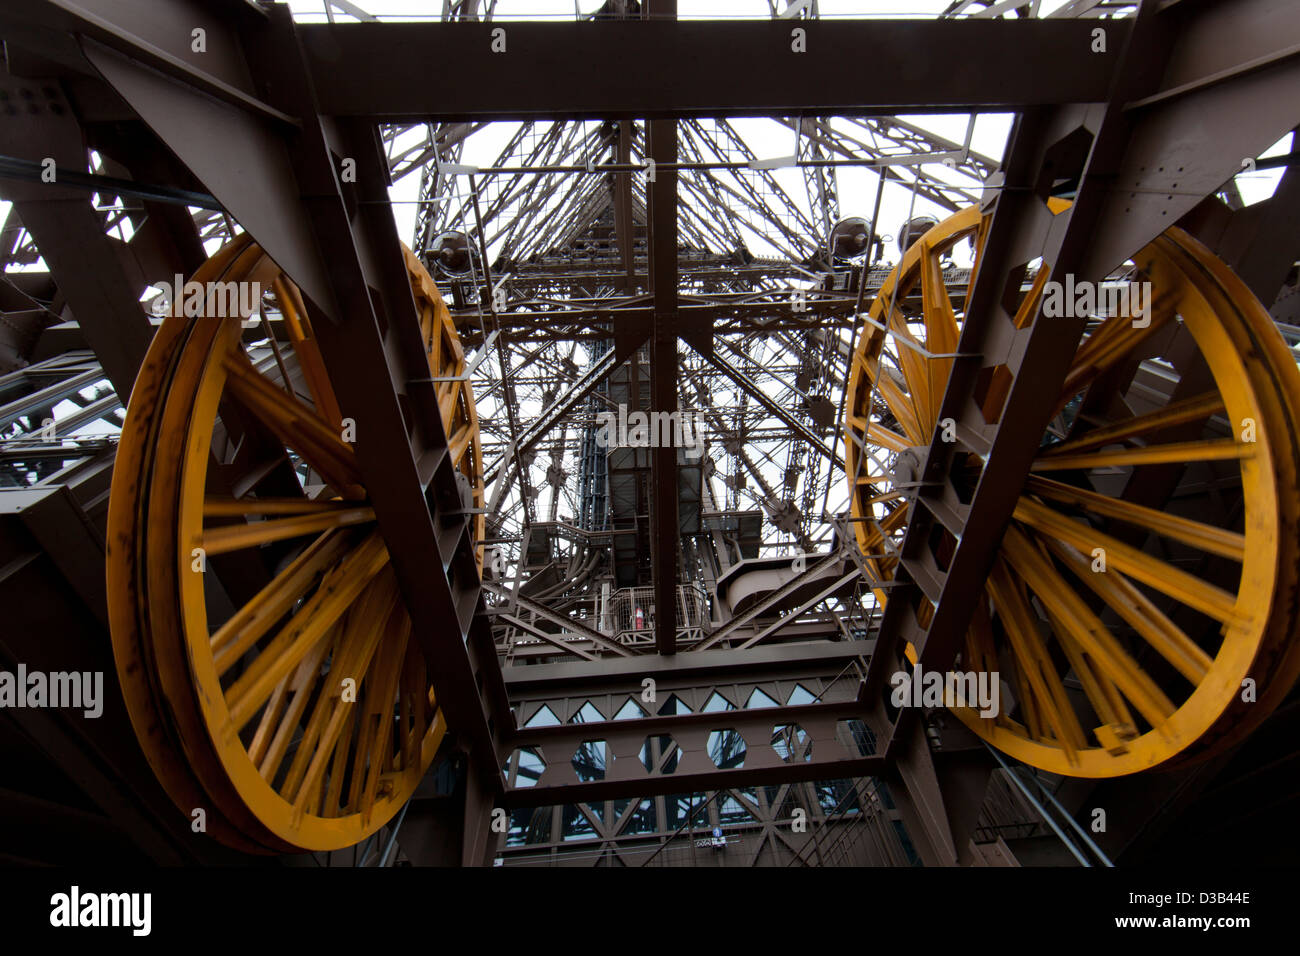 France, Paris, the inner workings of the Eiffel tower structure. Stock Photo